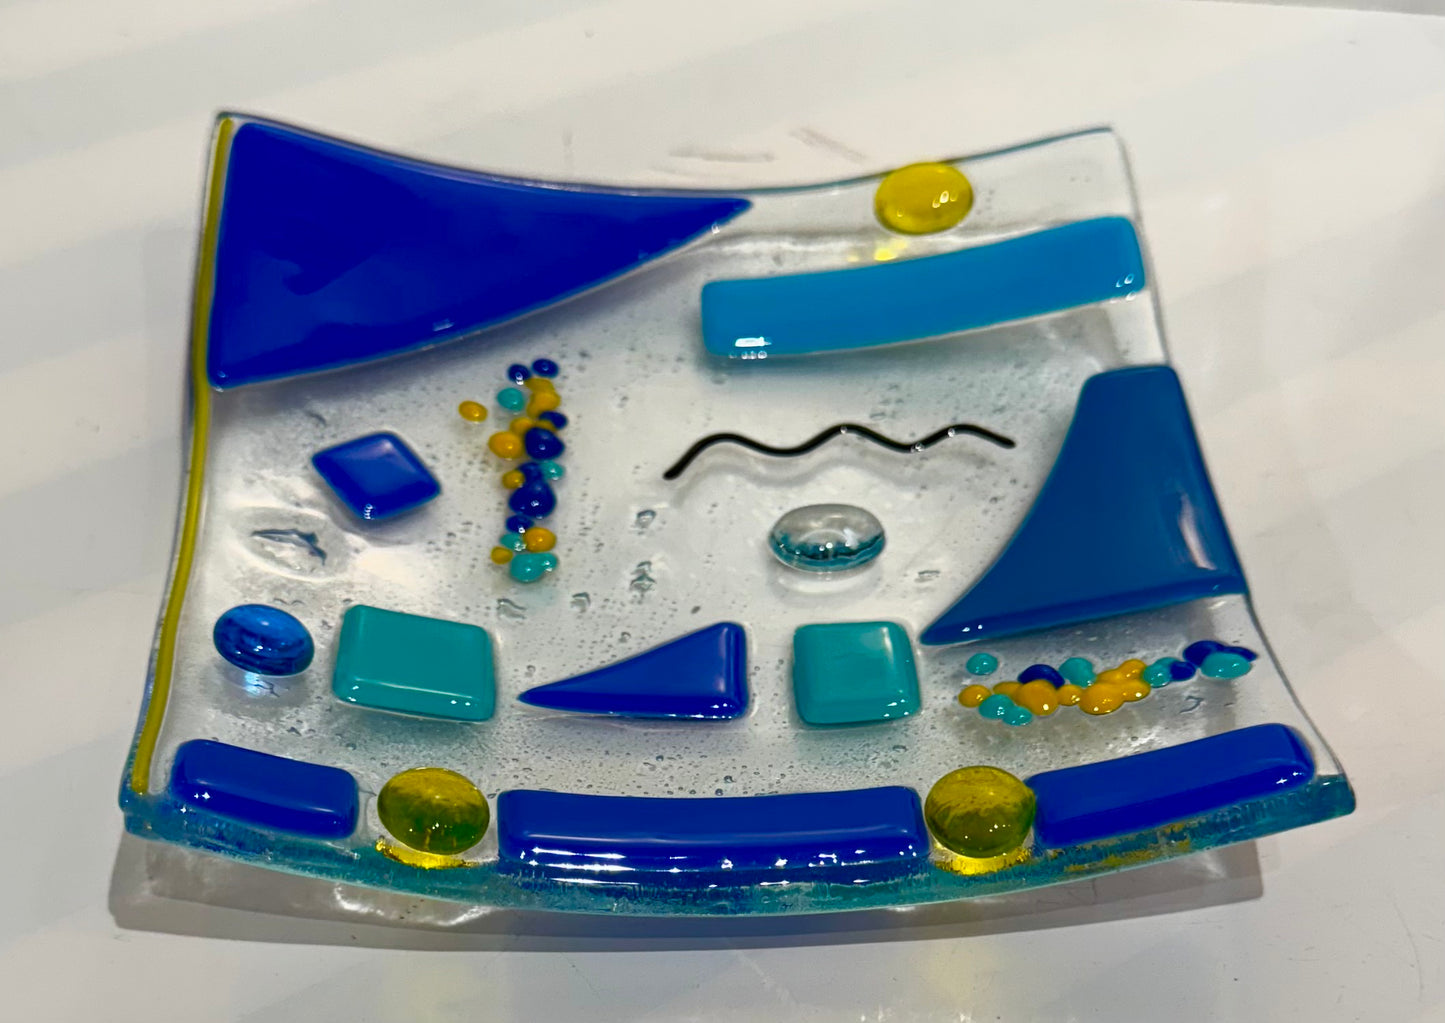 6" plate or suncatcher Fused glass, March 9, 1-3